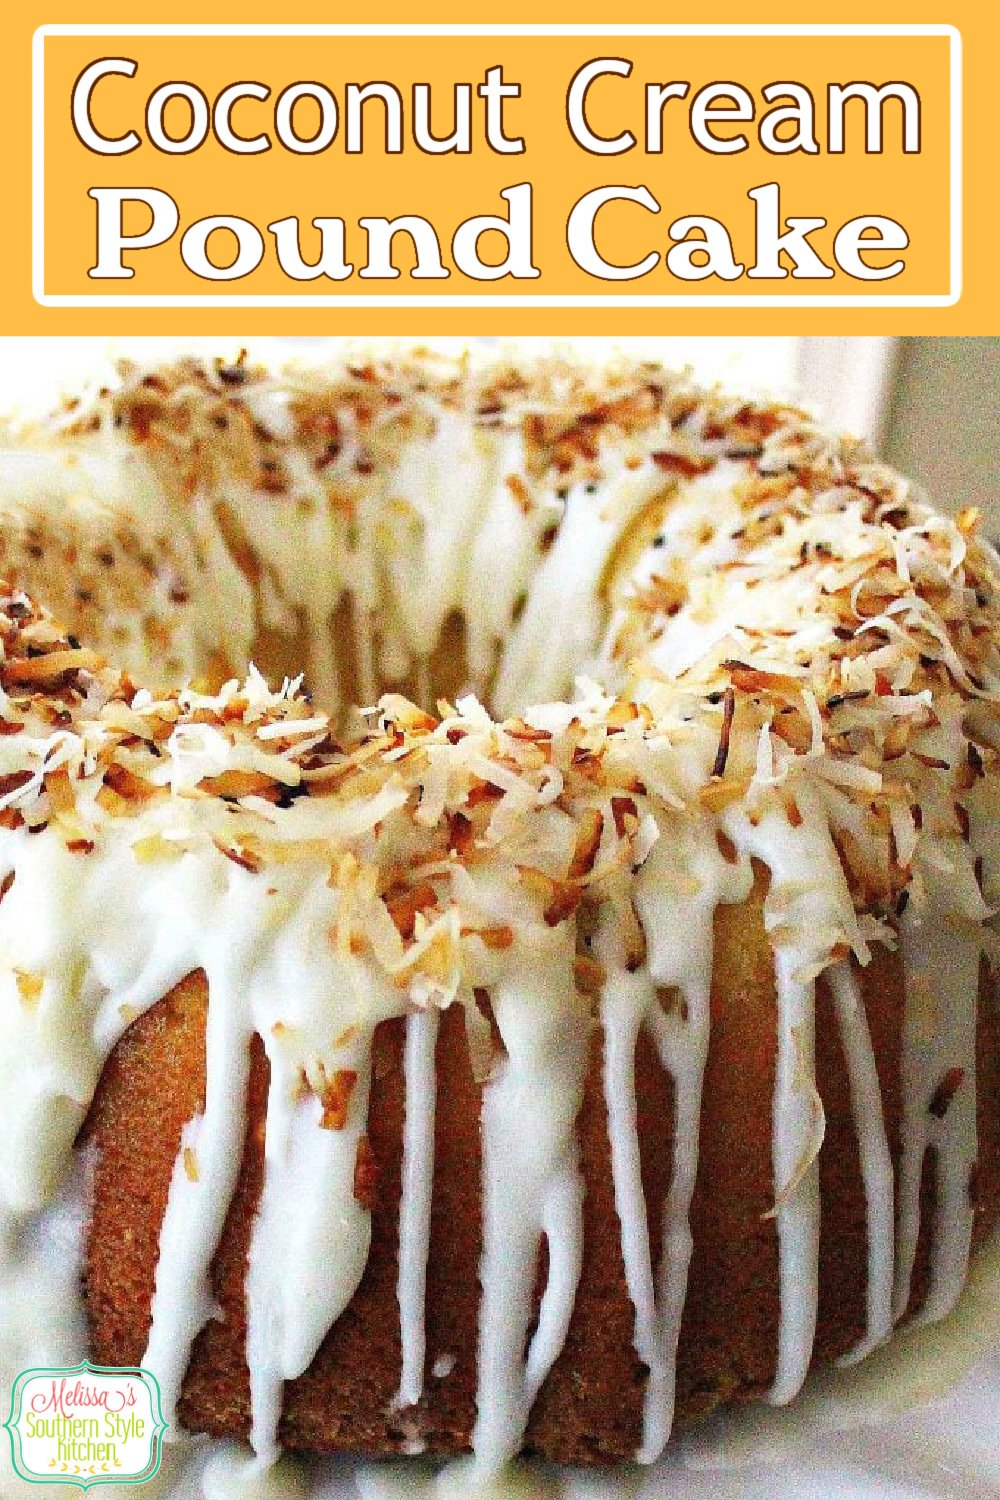 Made-from-scratch Coconut Cream Pound Cake is drizzled with a homemade vanilla cream glaze #coconutcake #coconutpoundcake #southernfood #southernrecipes #coconutdesserts #easter #easterdesserts #holidayrecipes #Southernpoundcake #cakerecipes #melissassouthernstylekitchen via @melissasssk